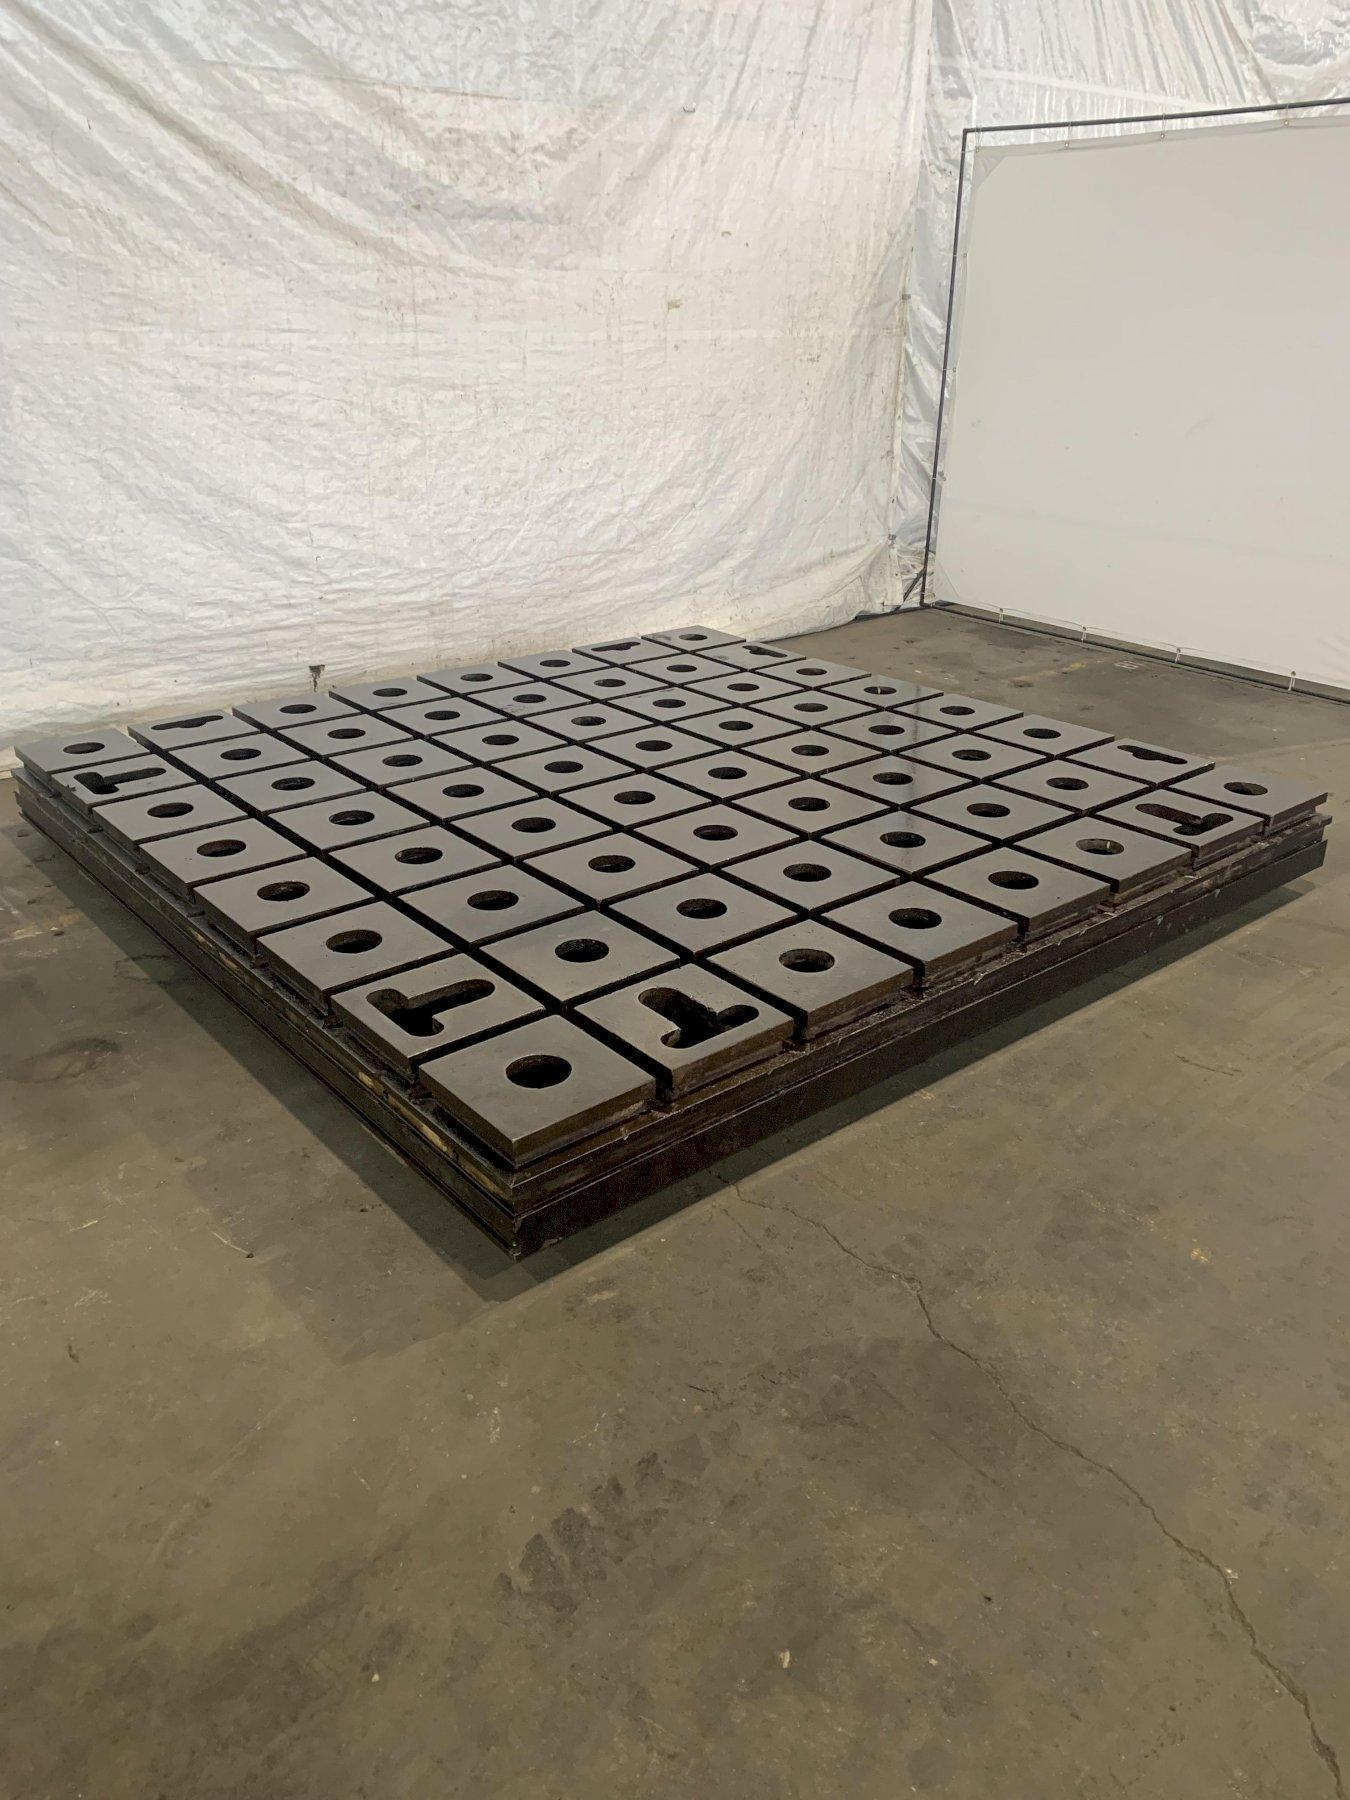 120" X 120" X 10" T-SLOTTED FLOOR PLATE: STOCK #18596